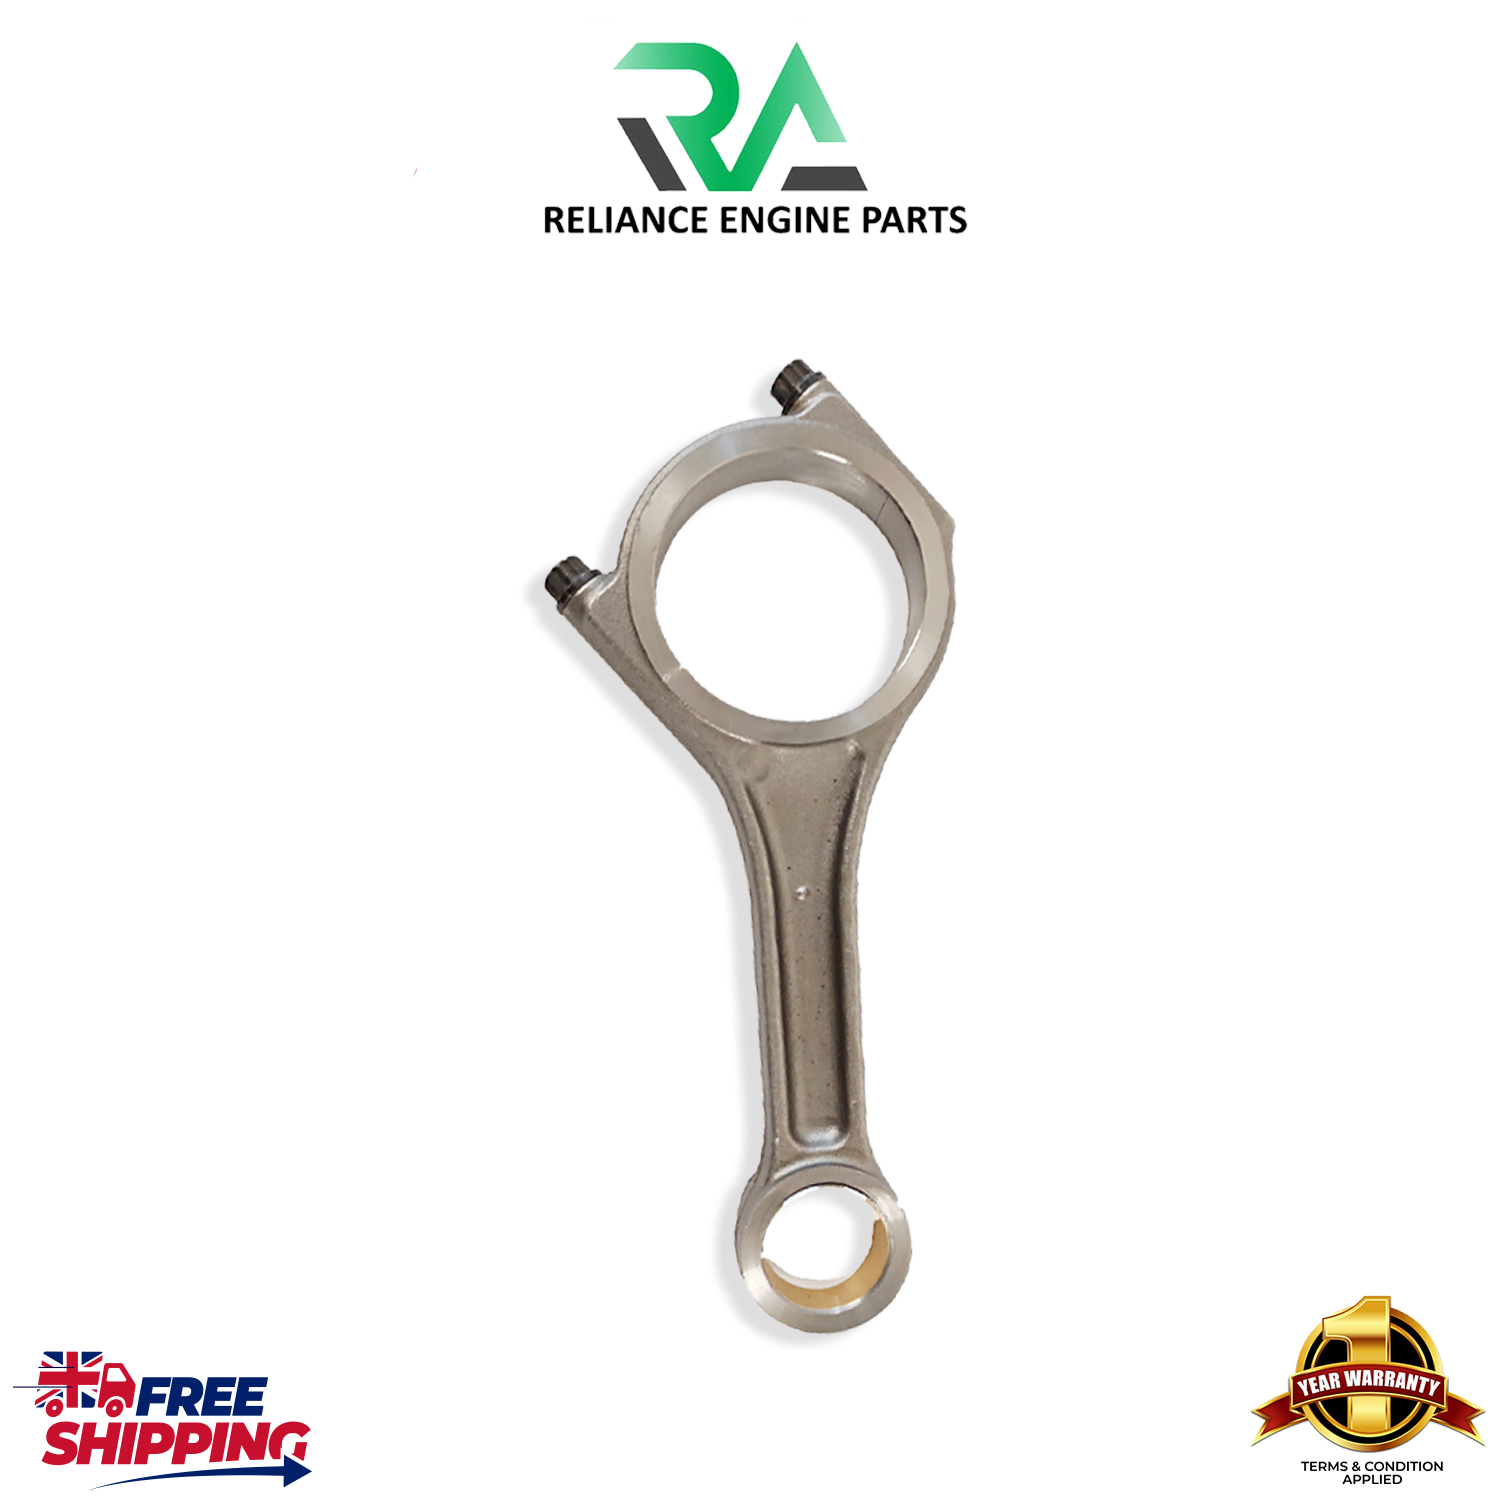 LAND ROVER RANGE ROVER 3.0 SUPERCHARGED ENGINE 306PS CONNECTING CON ROD - 1 PC